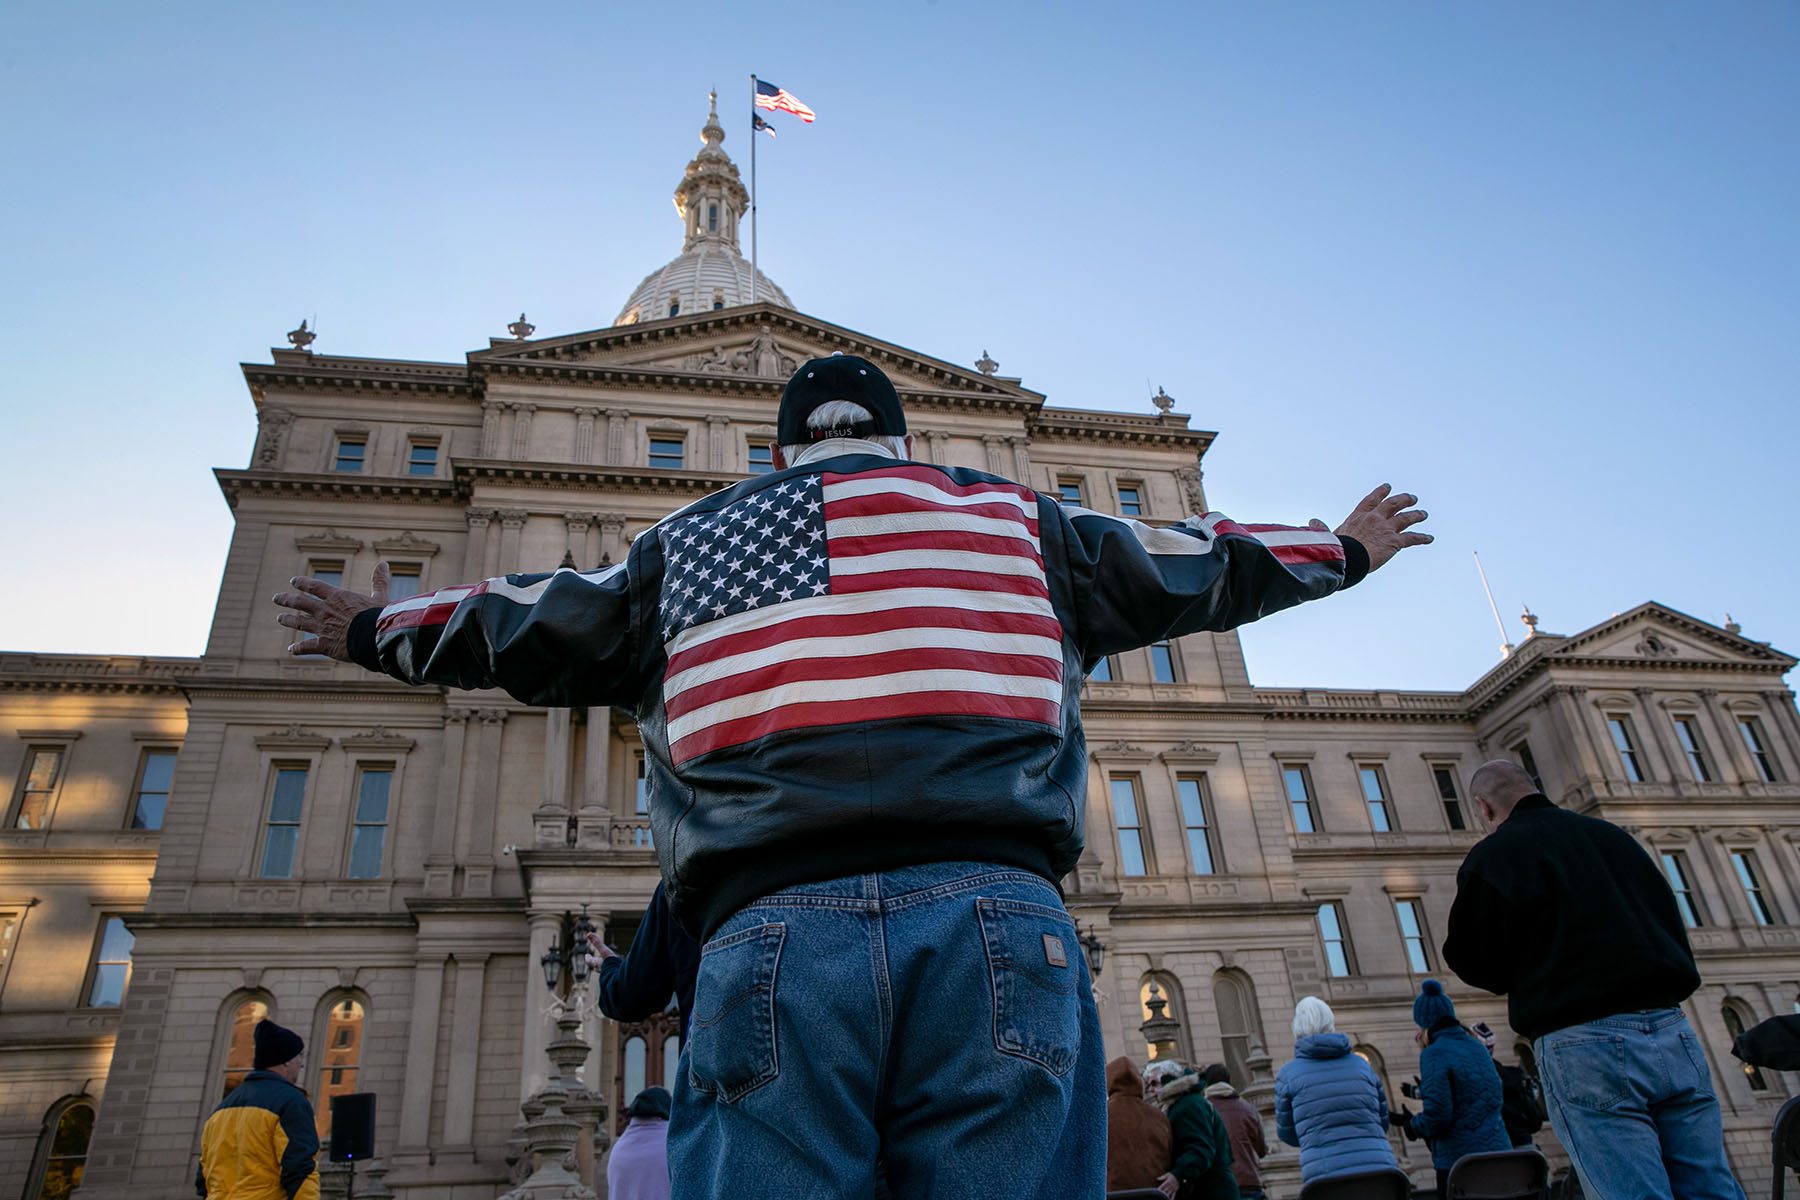 A man wearing a leather jacket featuring an American flag waves his arms as he prays outside the Michigan State Capitol.